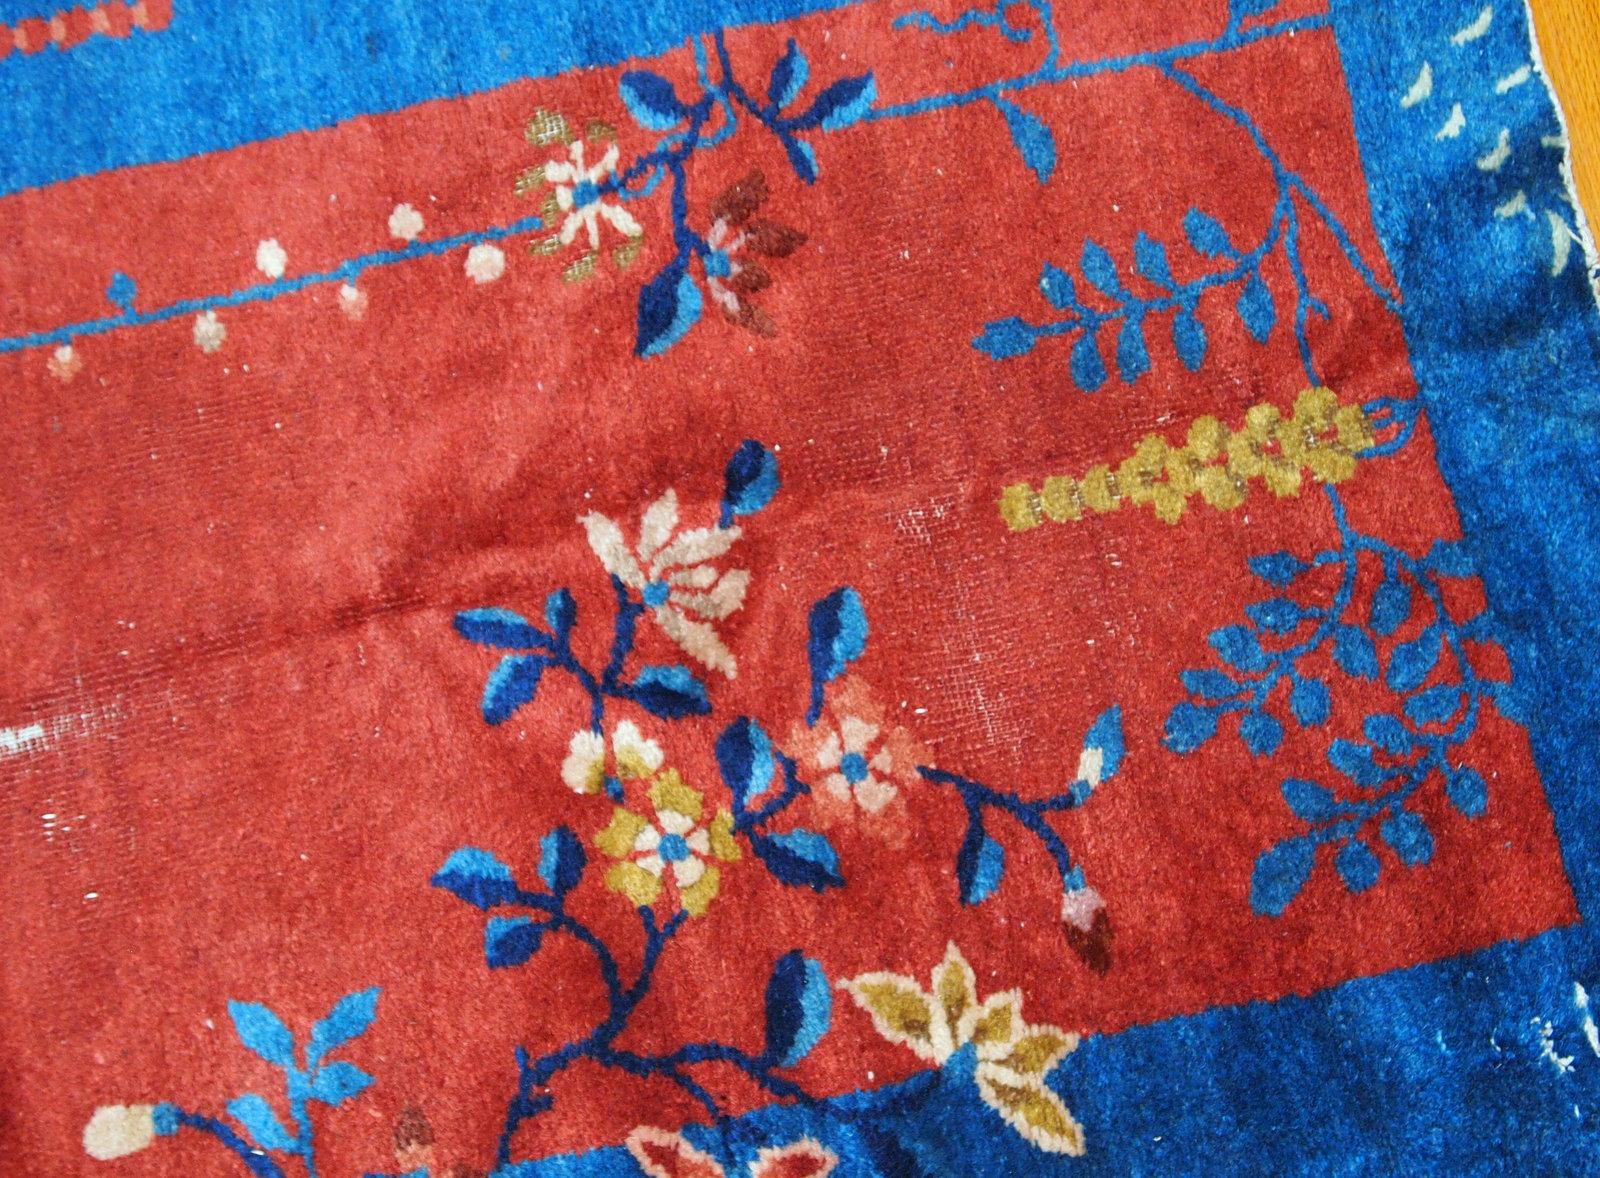 Handmade antique Art Deco Chinese rug from the beginning of 20th century in red and blue wool. The rug is in original condition, it has some low pile.

- Condition: Original, some low pile,

- circa 1920s,

- Size: 2.3' x 4.2' (71 cm x 129